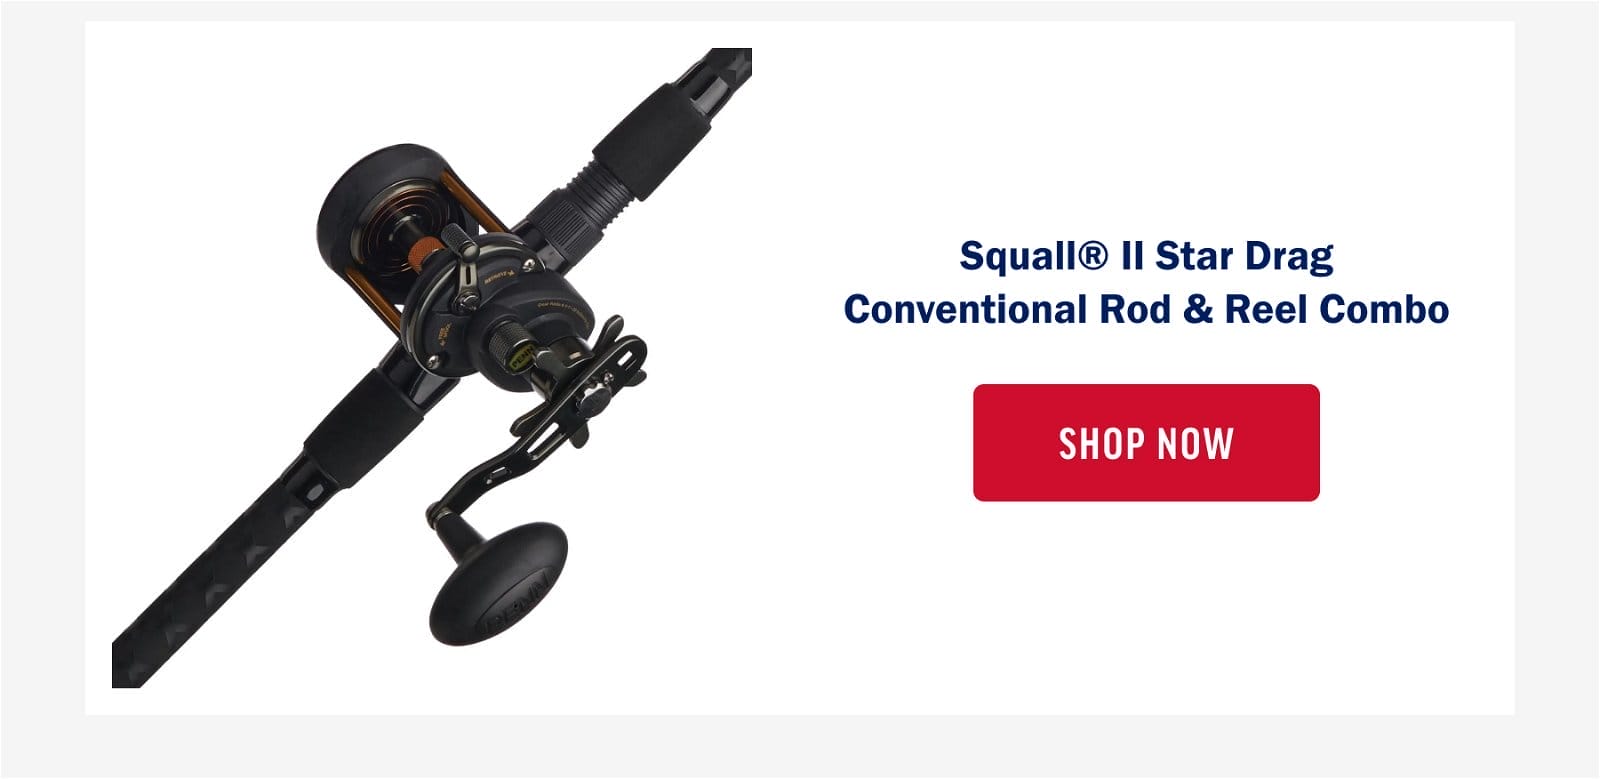 Squall® II Star Drag Conventional Rod & Reel Combo